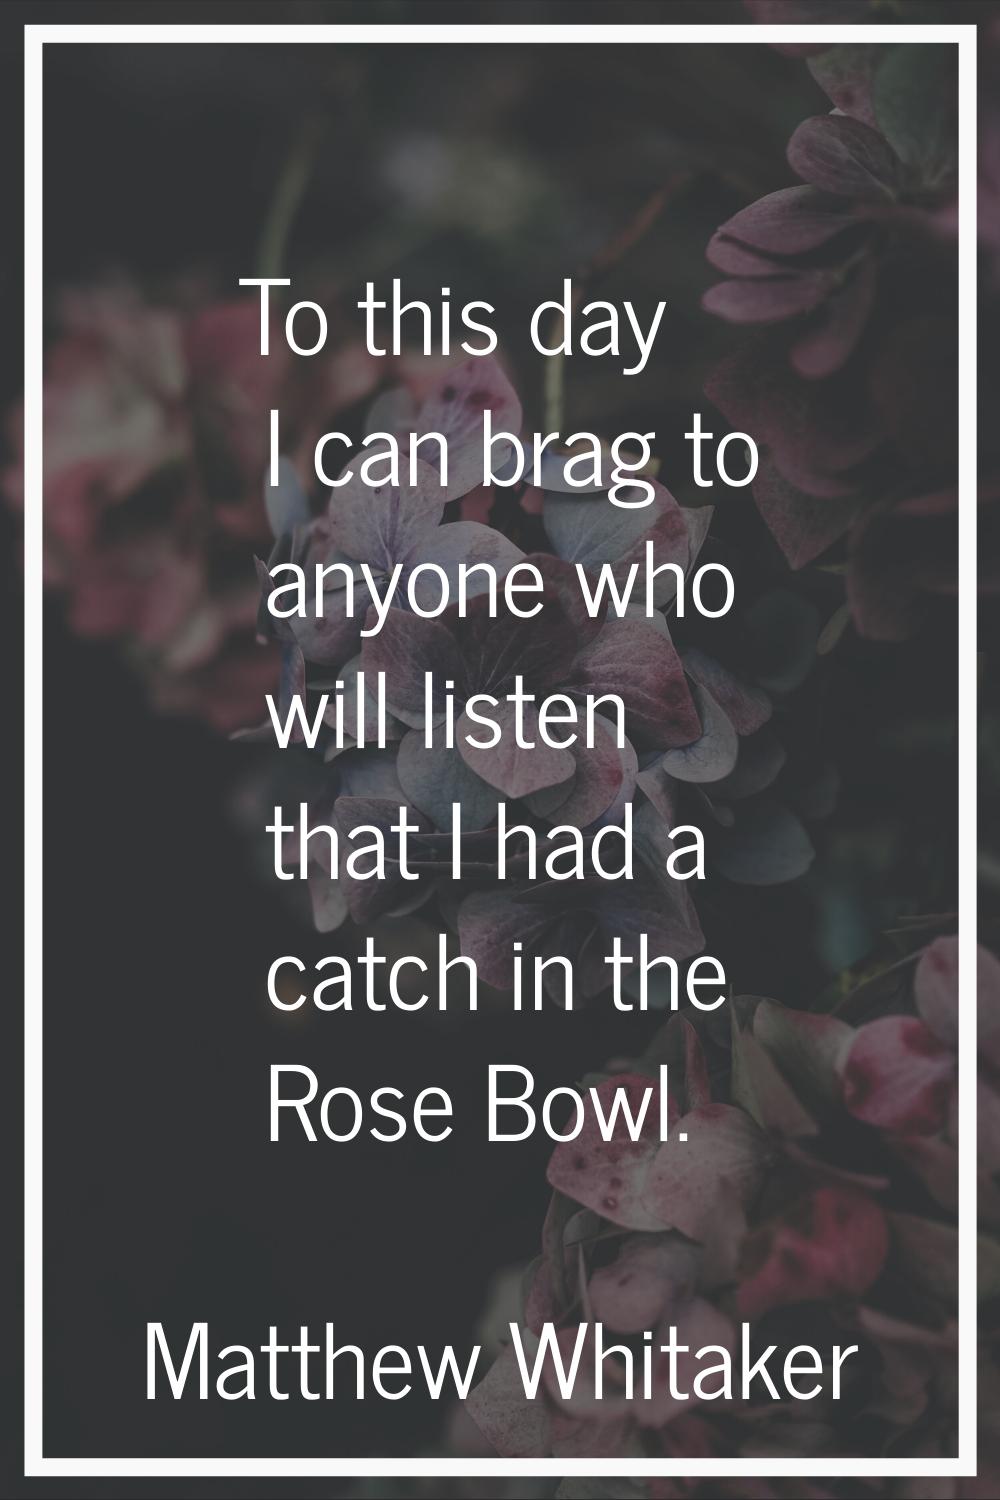 To this day I can brag to anyone who will listen that I had a catch in the Rose Bowl.